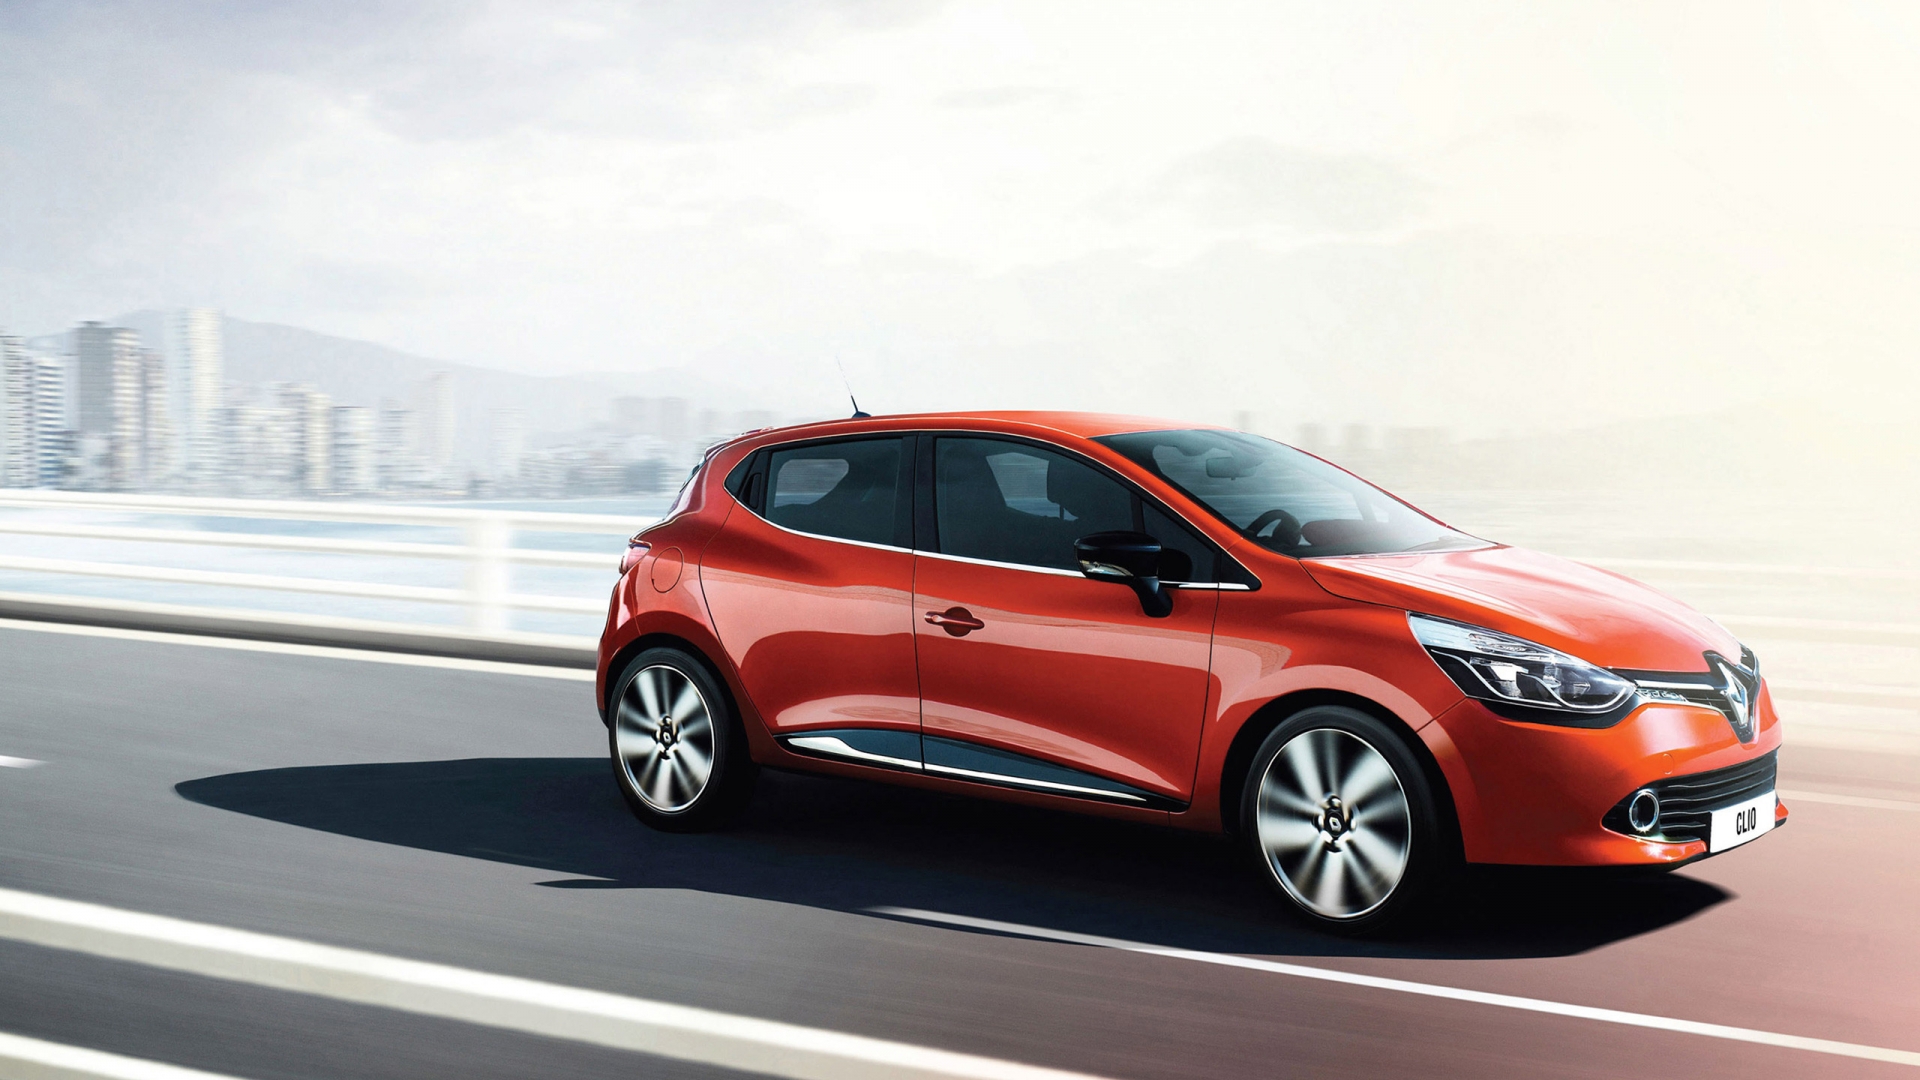 2013 Renault Clio for 1920 x 1080 HDTV 1080p resolution